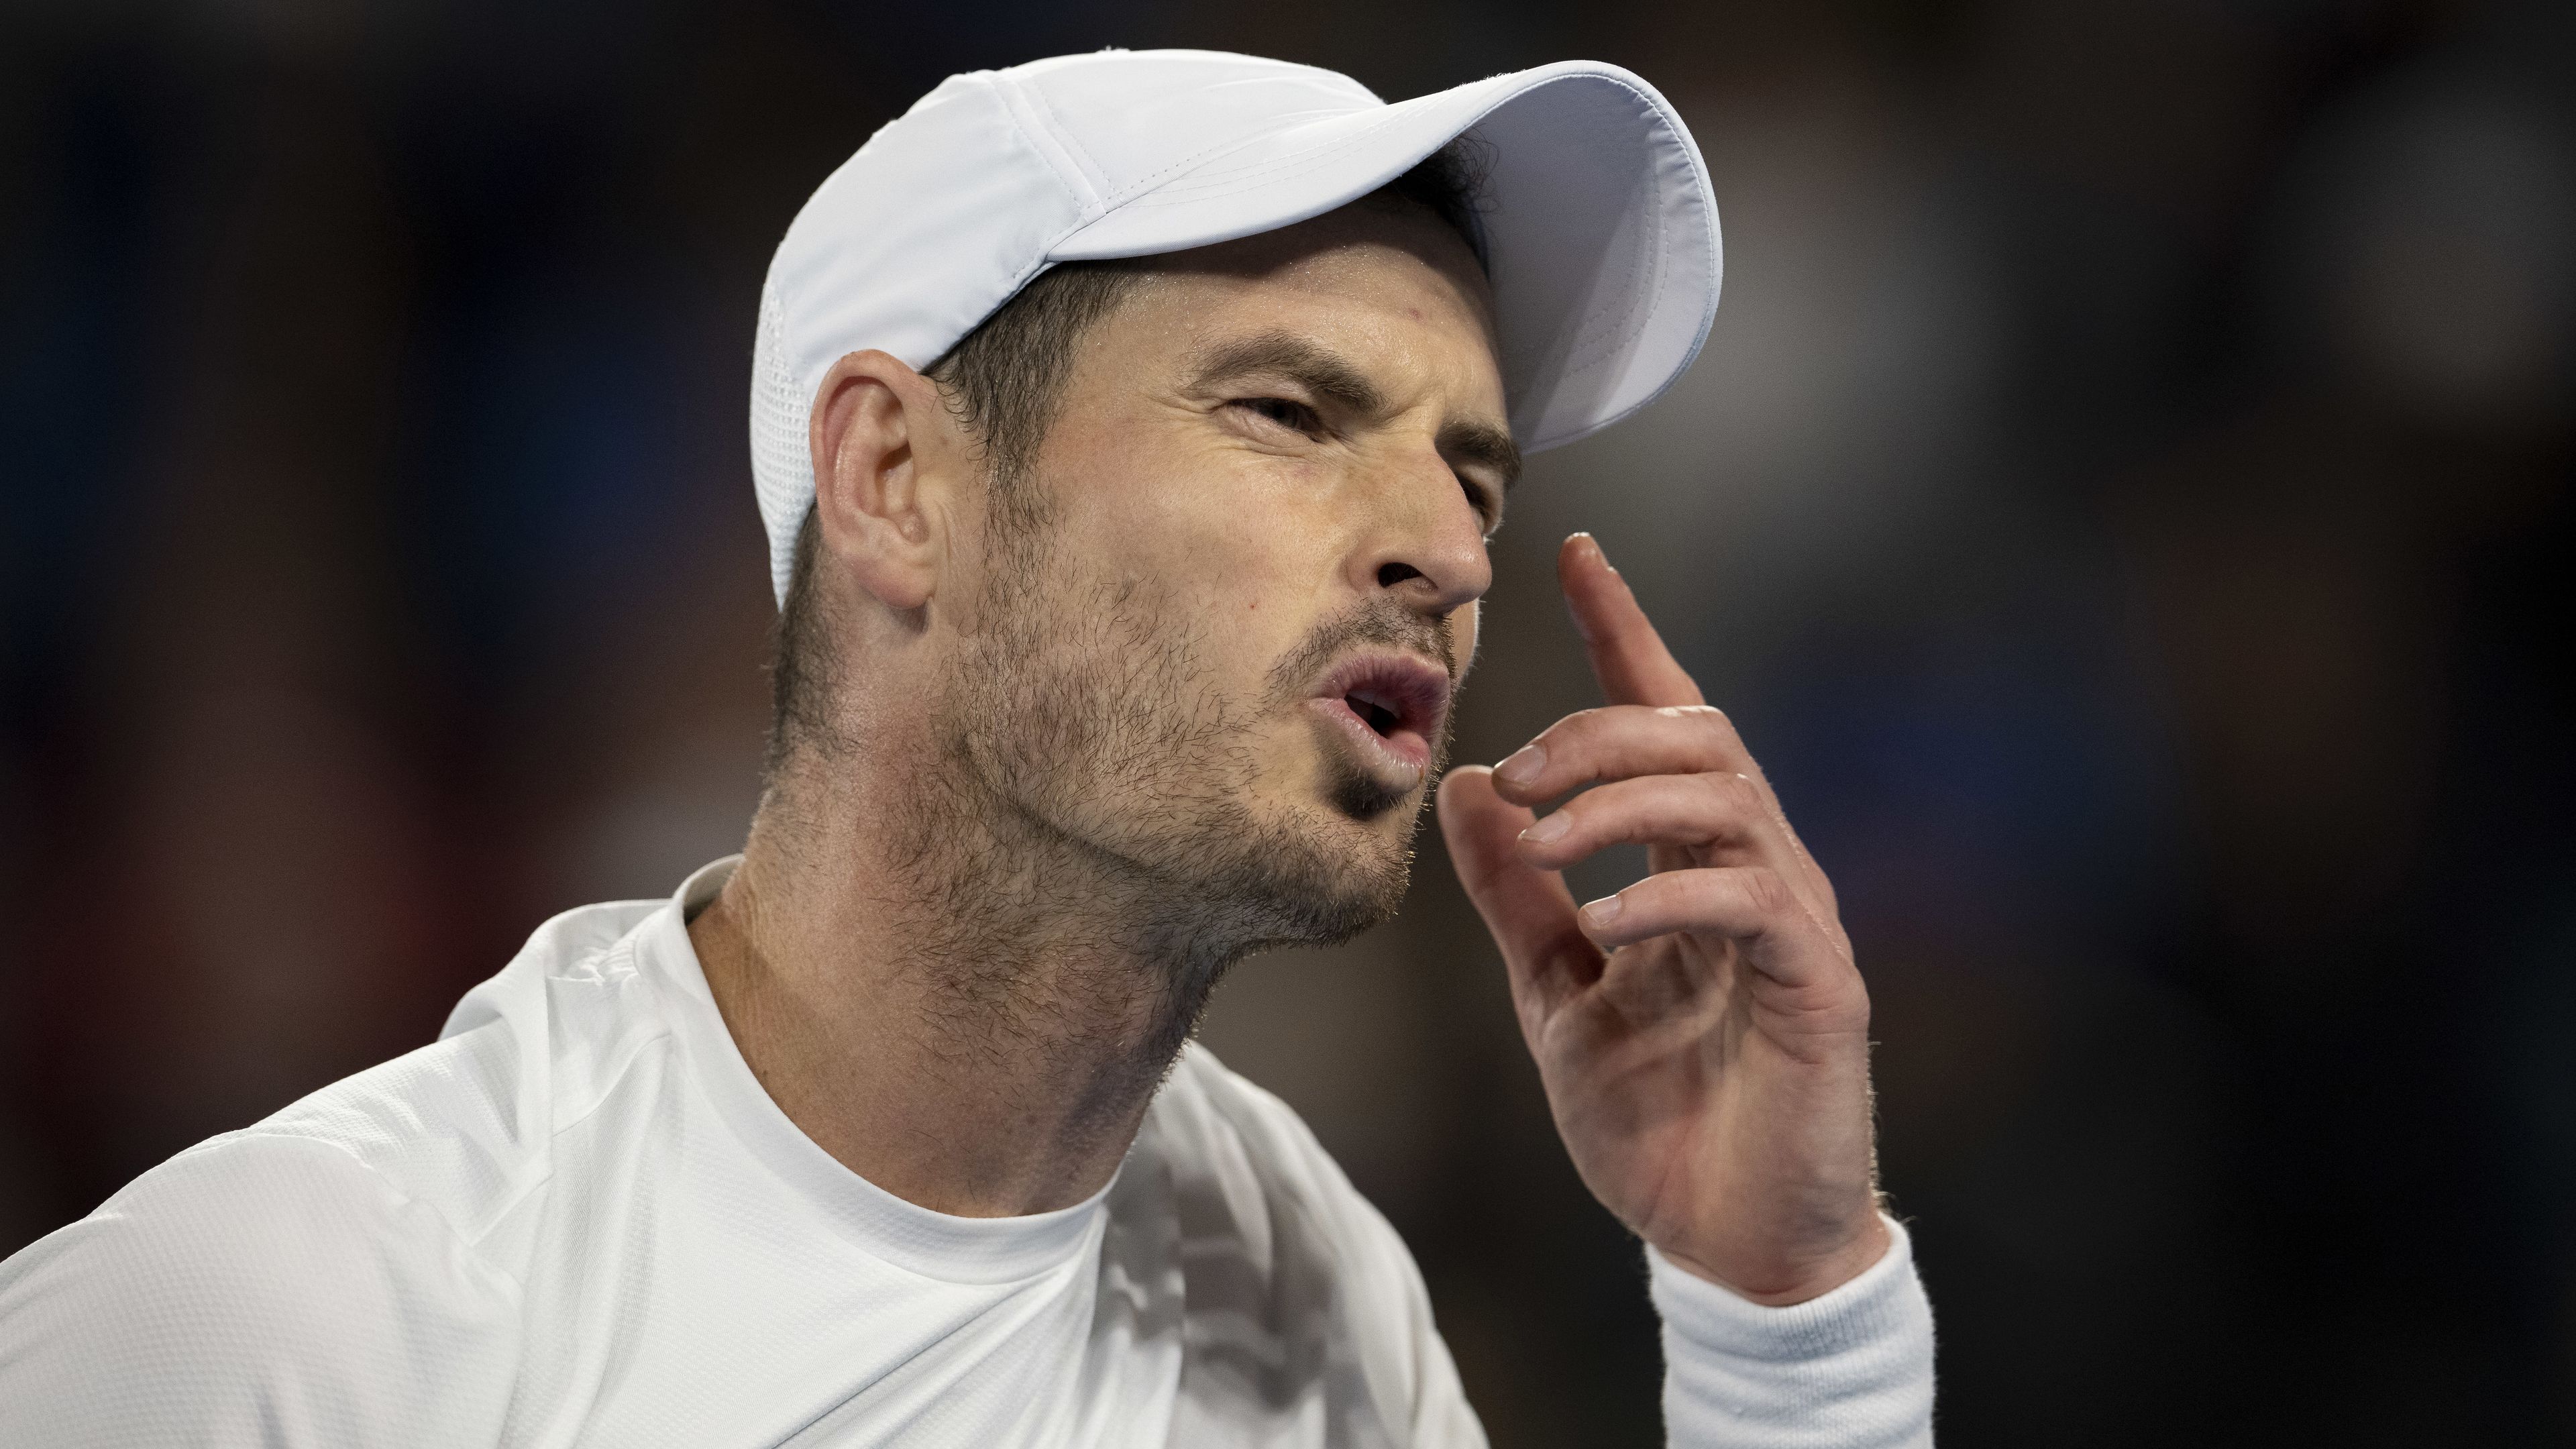 Andy Murray of Great Britain reacts in their round two singles match against Thanasi Kokkinakis of Australia during day four of the 2023 Australian Open at Melbourne Park on January 19, 2023 in Melbourne, Australia. (Photo by Will Murray/Getty Images)